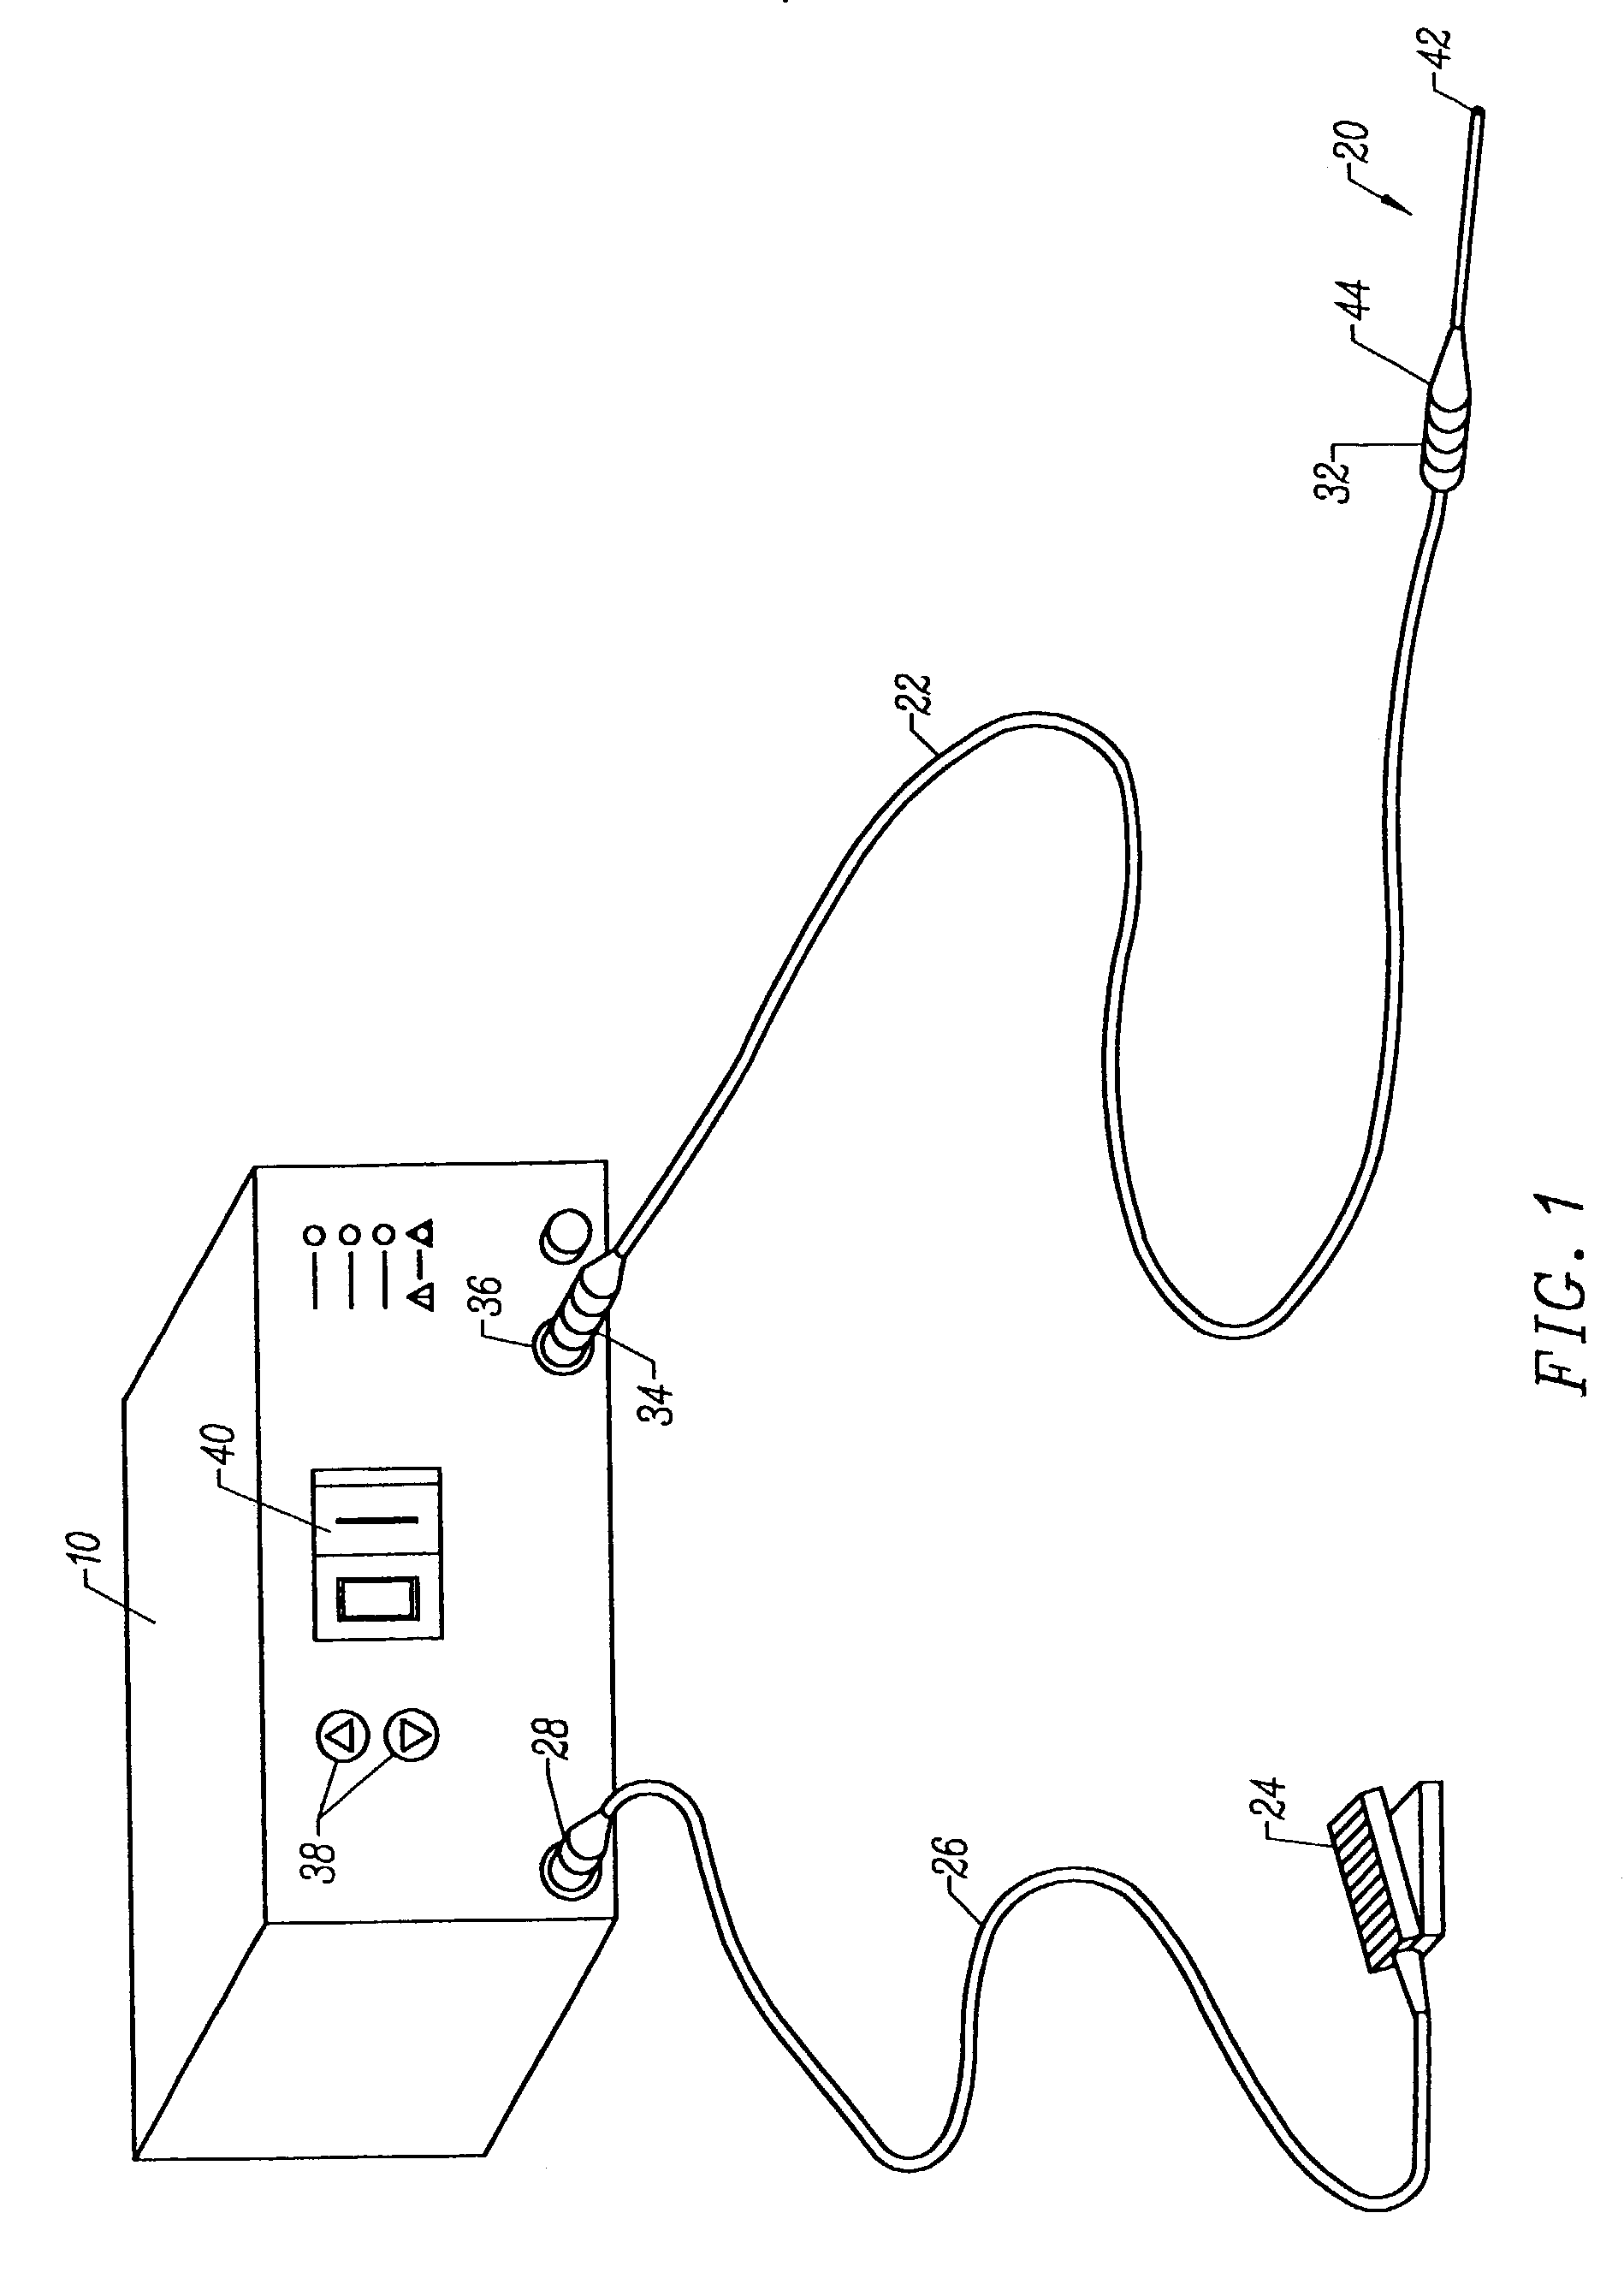 Electrosurgical probe having circular electrode array for ablating joint tissue and systems related thereto